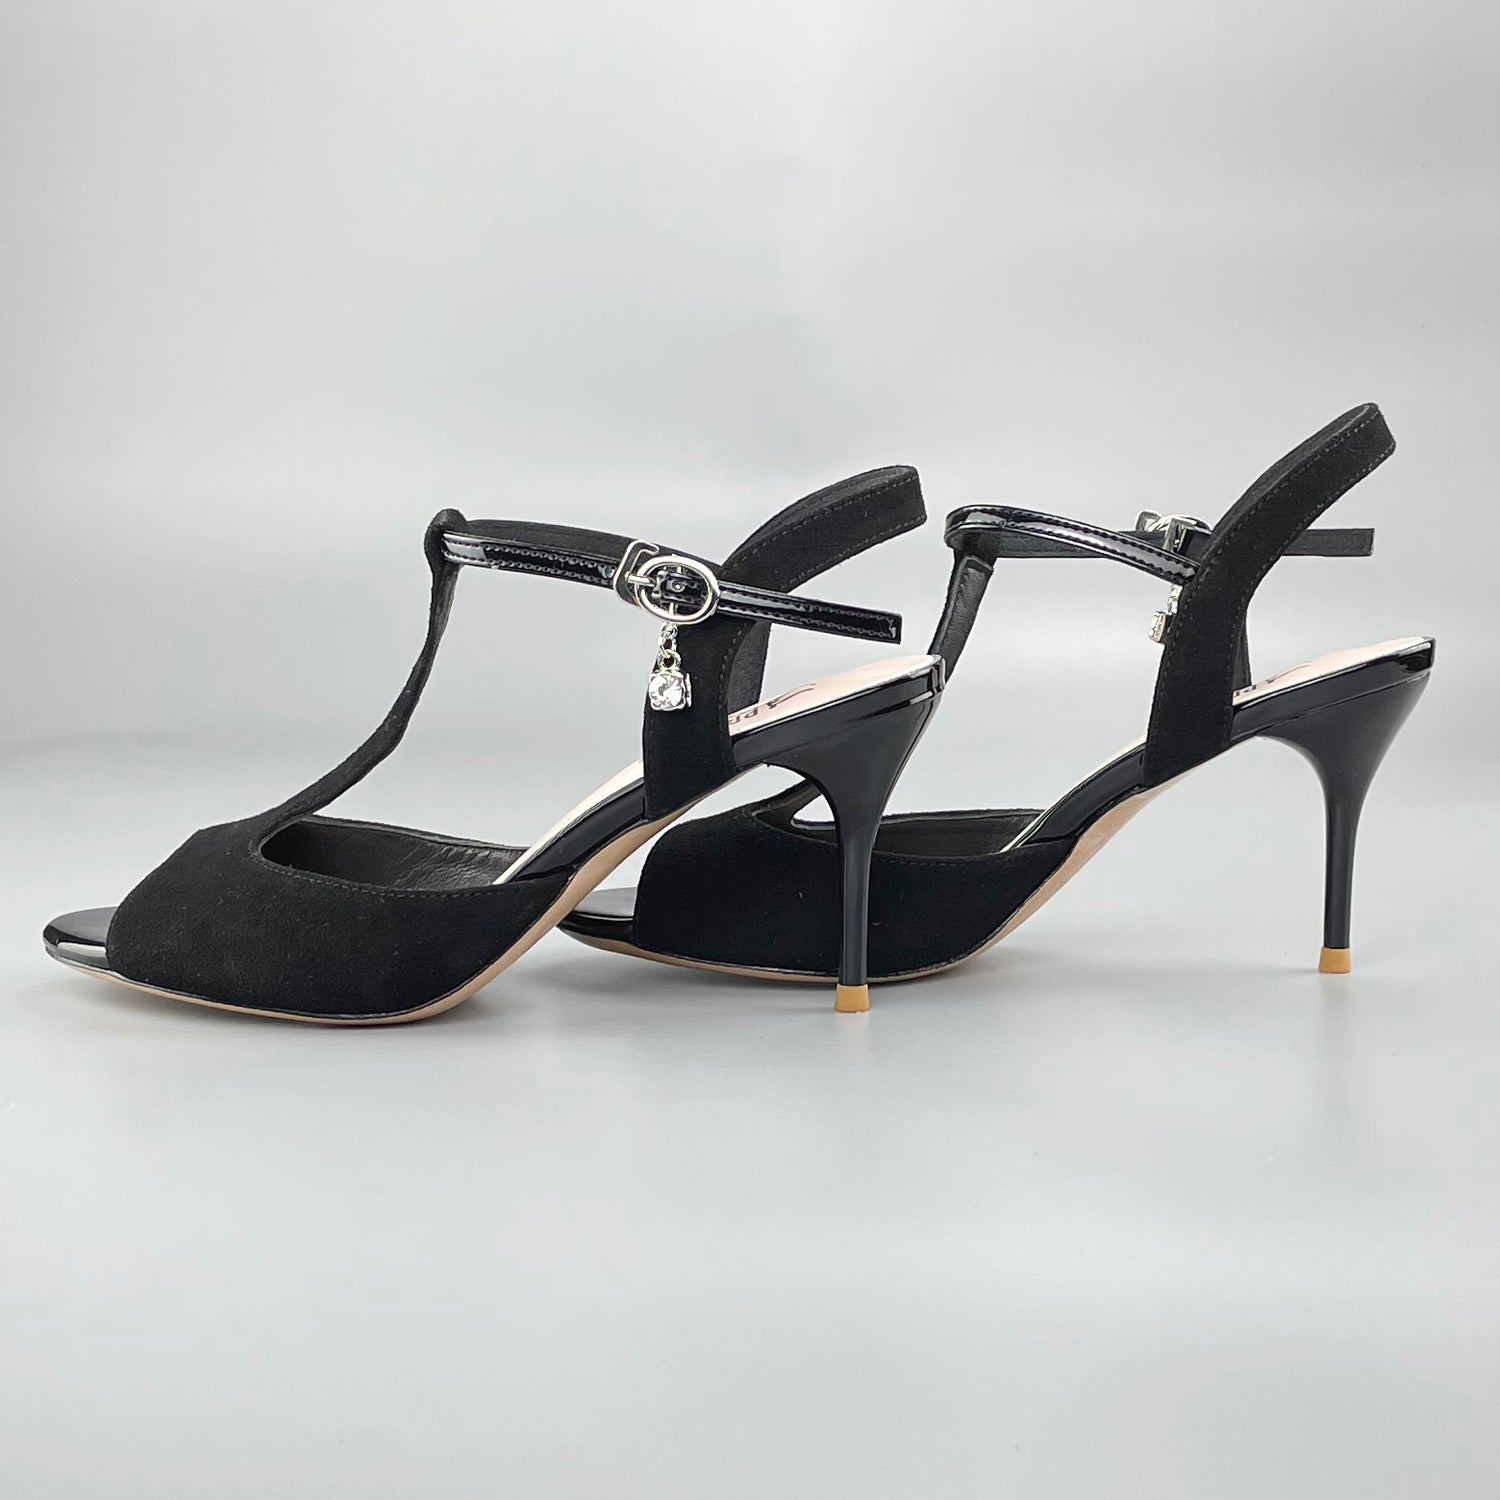 Pro Dancer open-toe and open-back Argentine Tango shoes with high salsa heels and hard leather sole sandals in black (PD-9046A)5